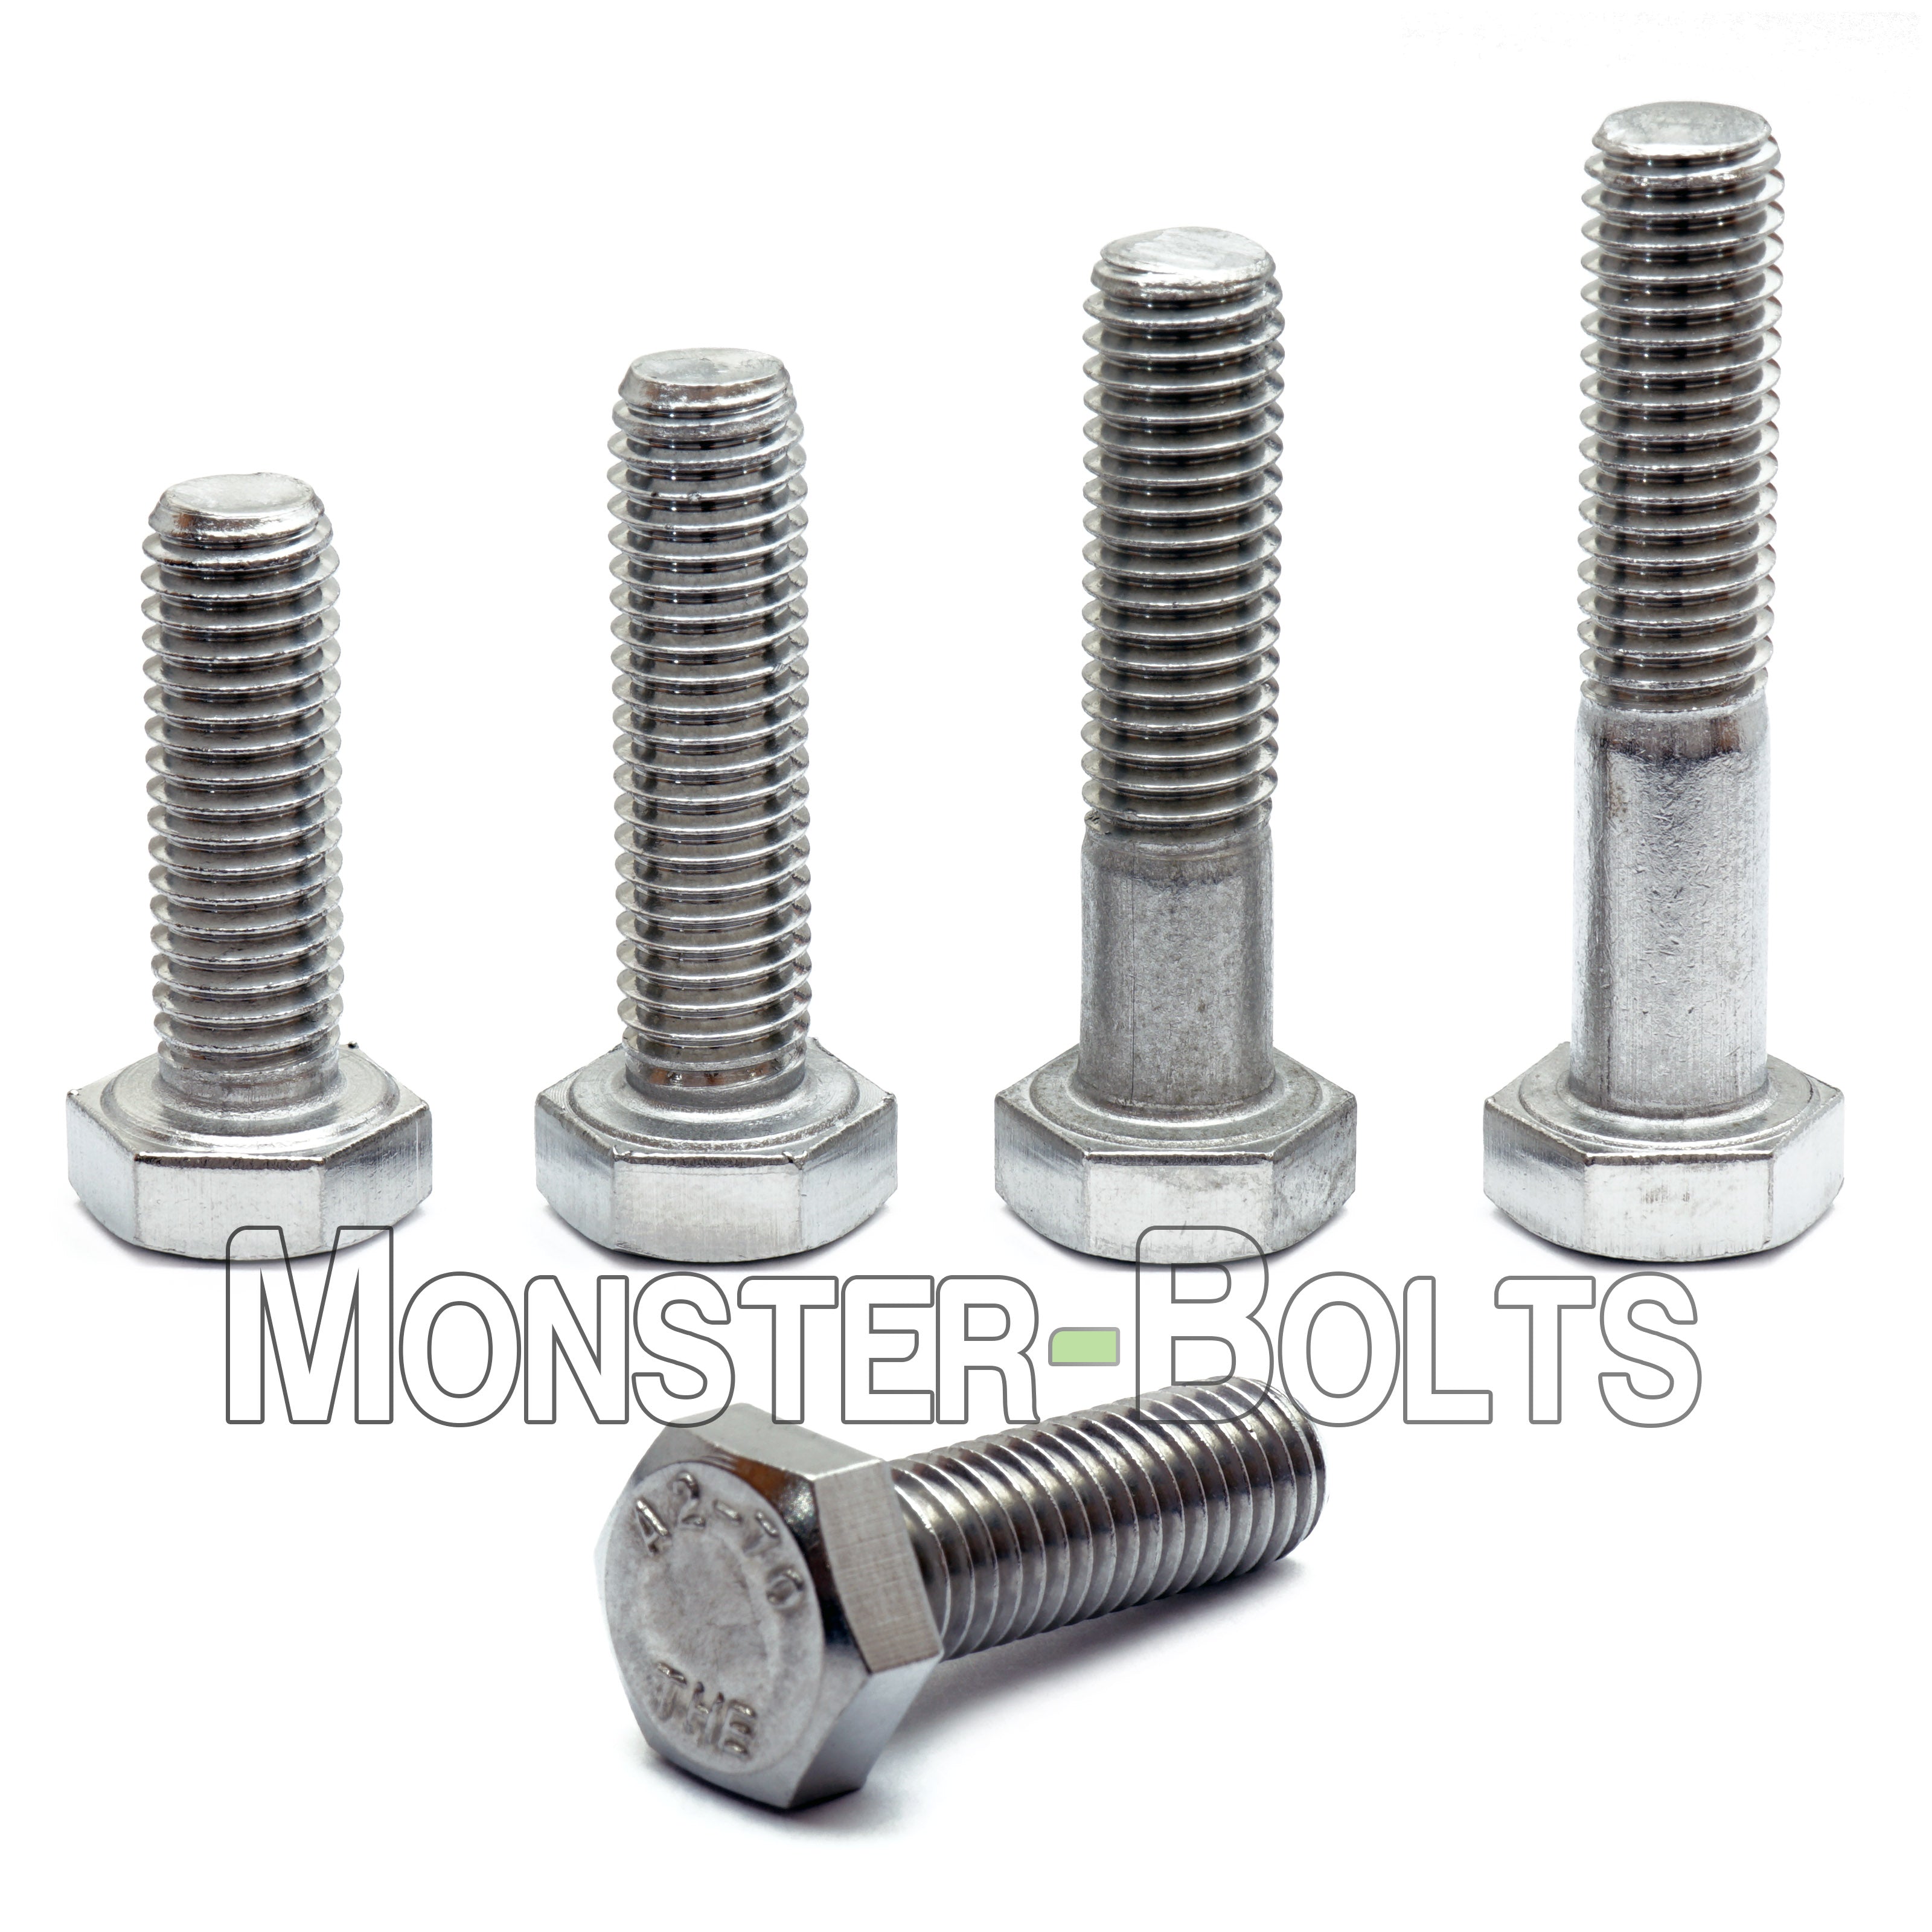 1/4-20 x 7" Stainless Steel Carriage Bolts Grade 18-8 Qty 10 